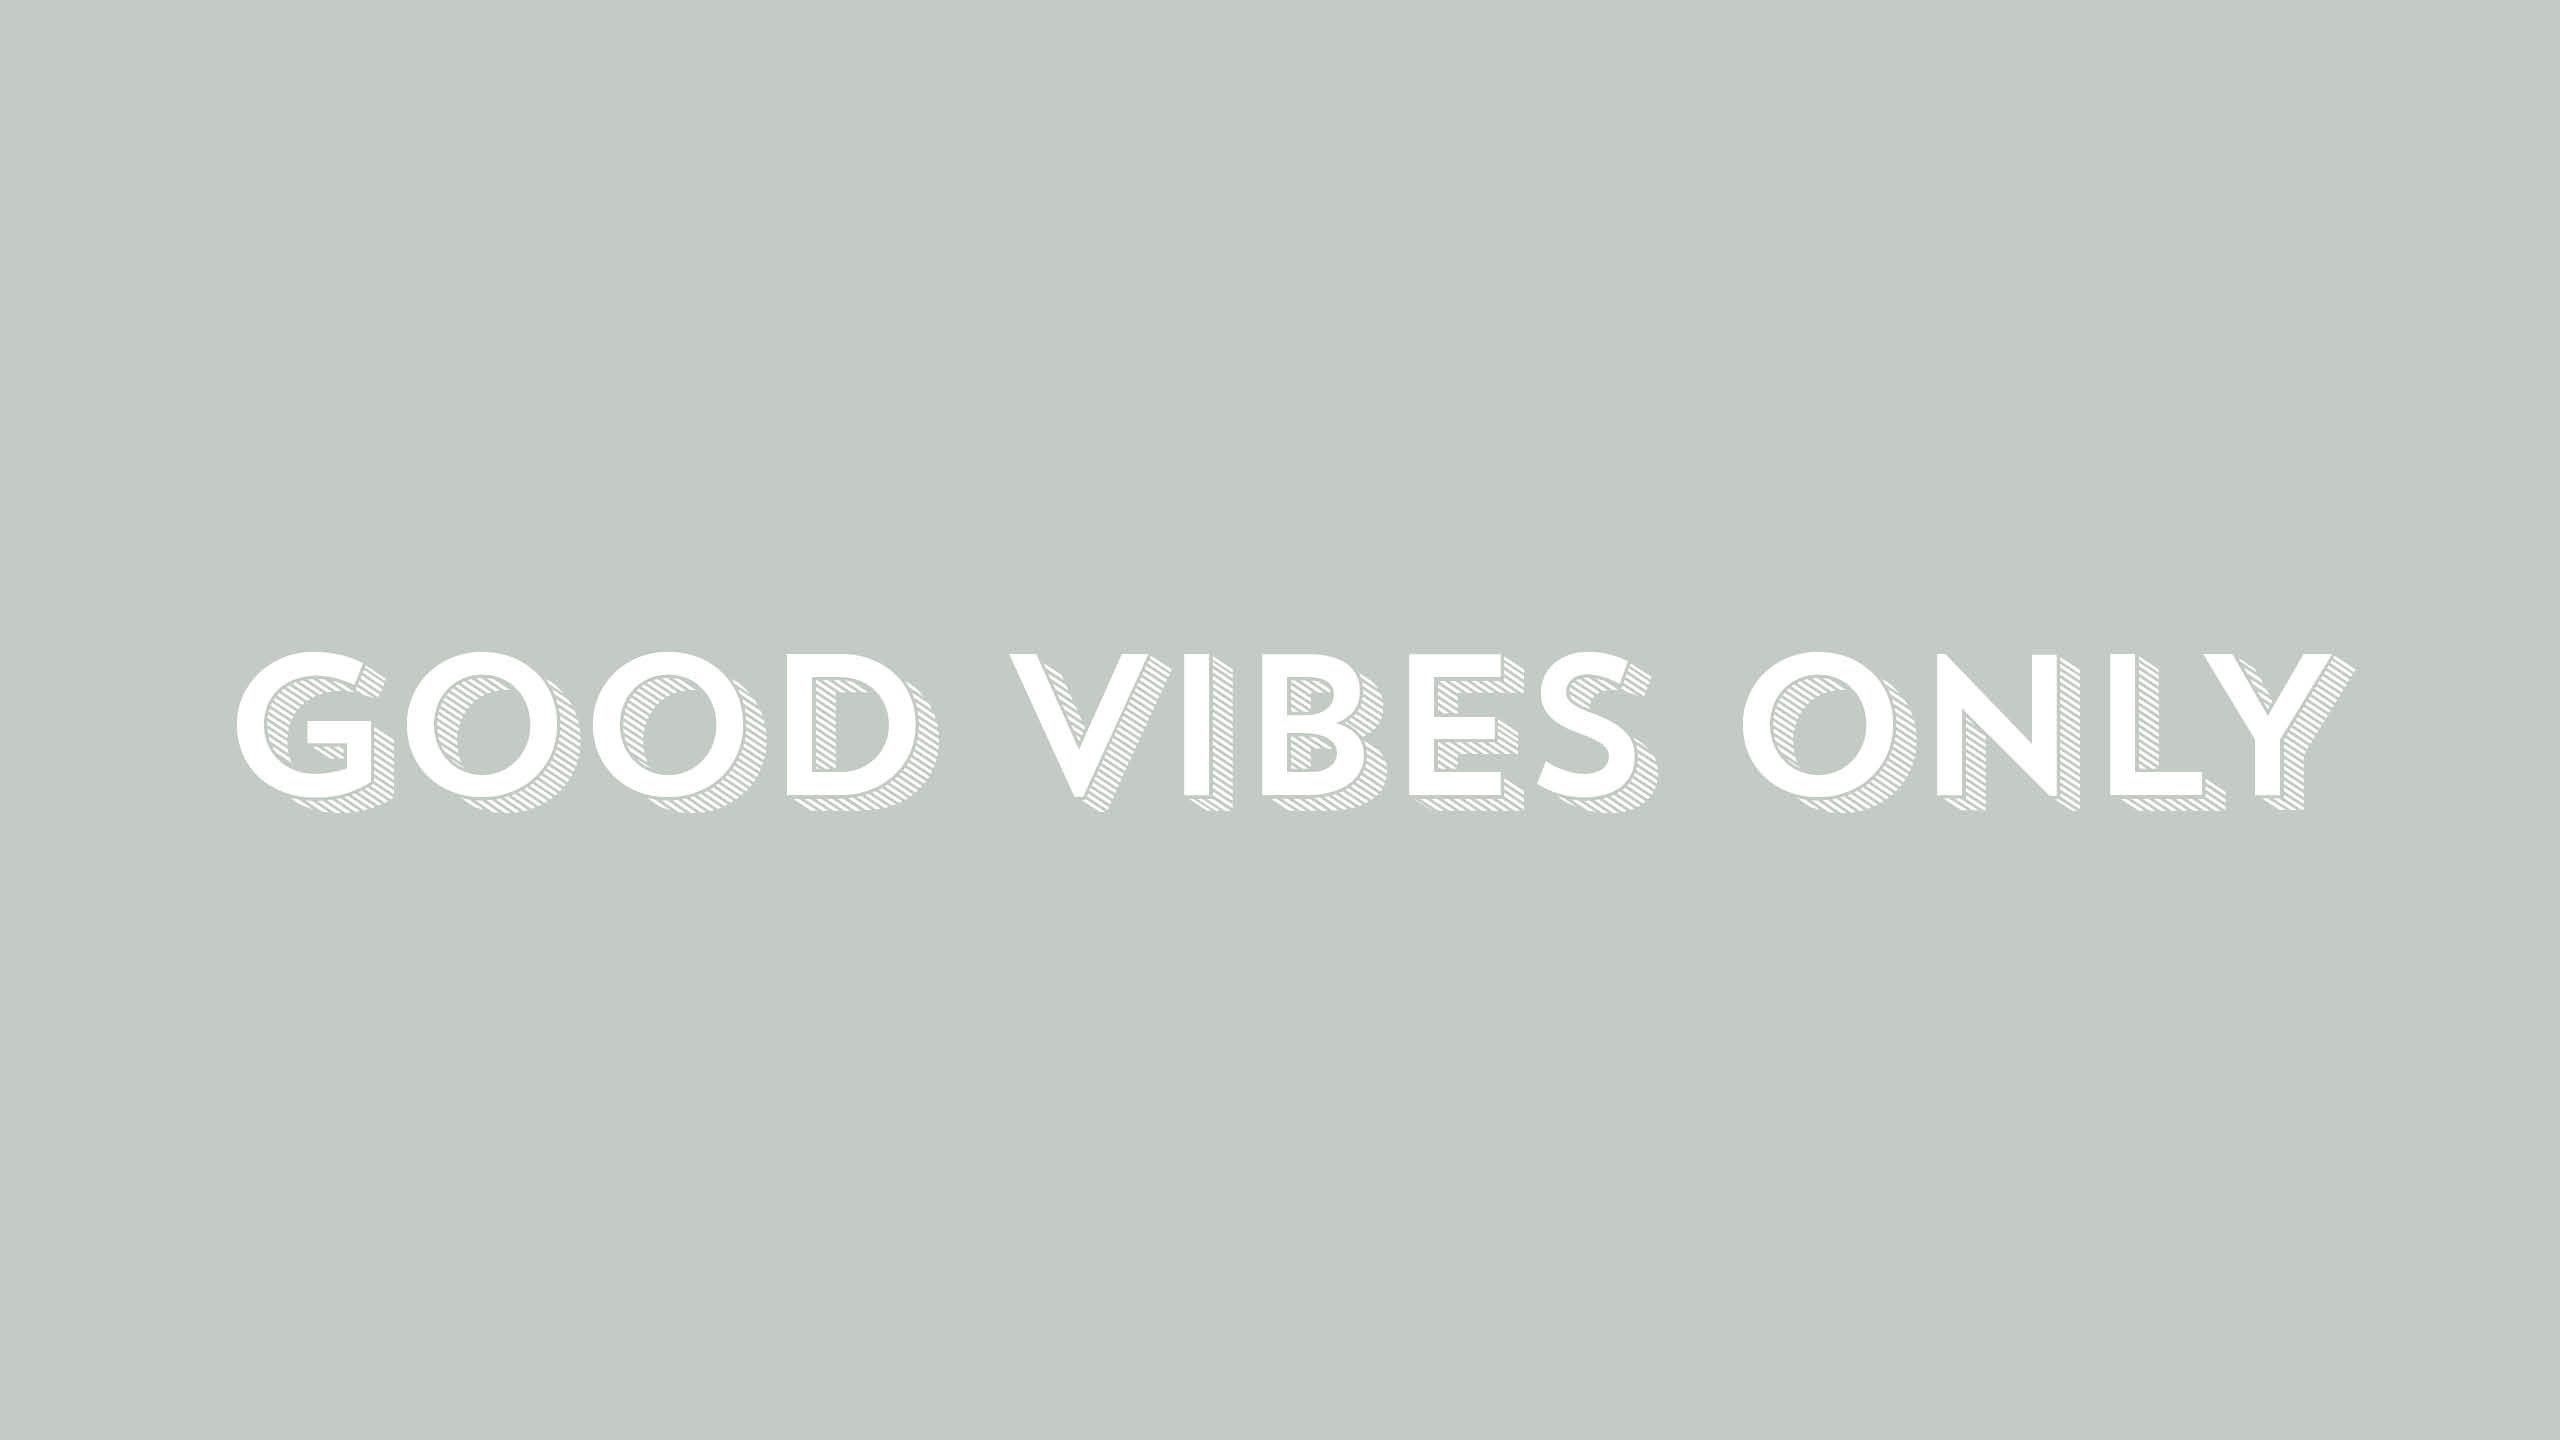 The good vibes only logo - 